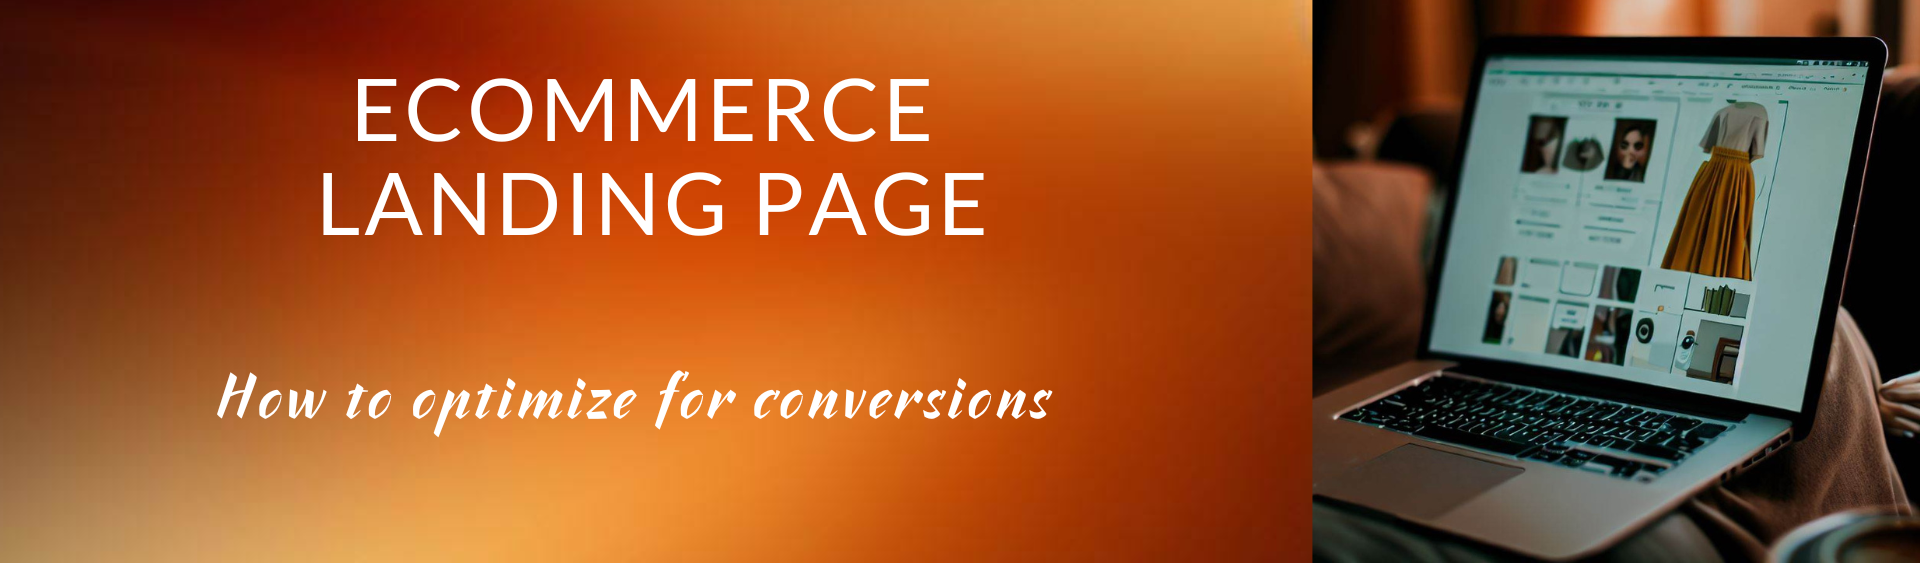 eCommerce-Landing-Page